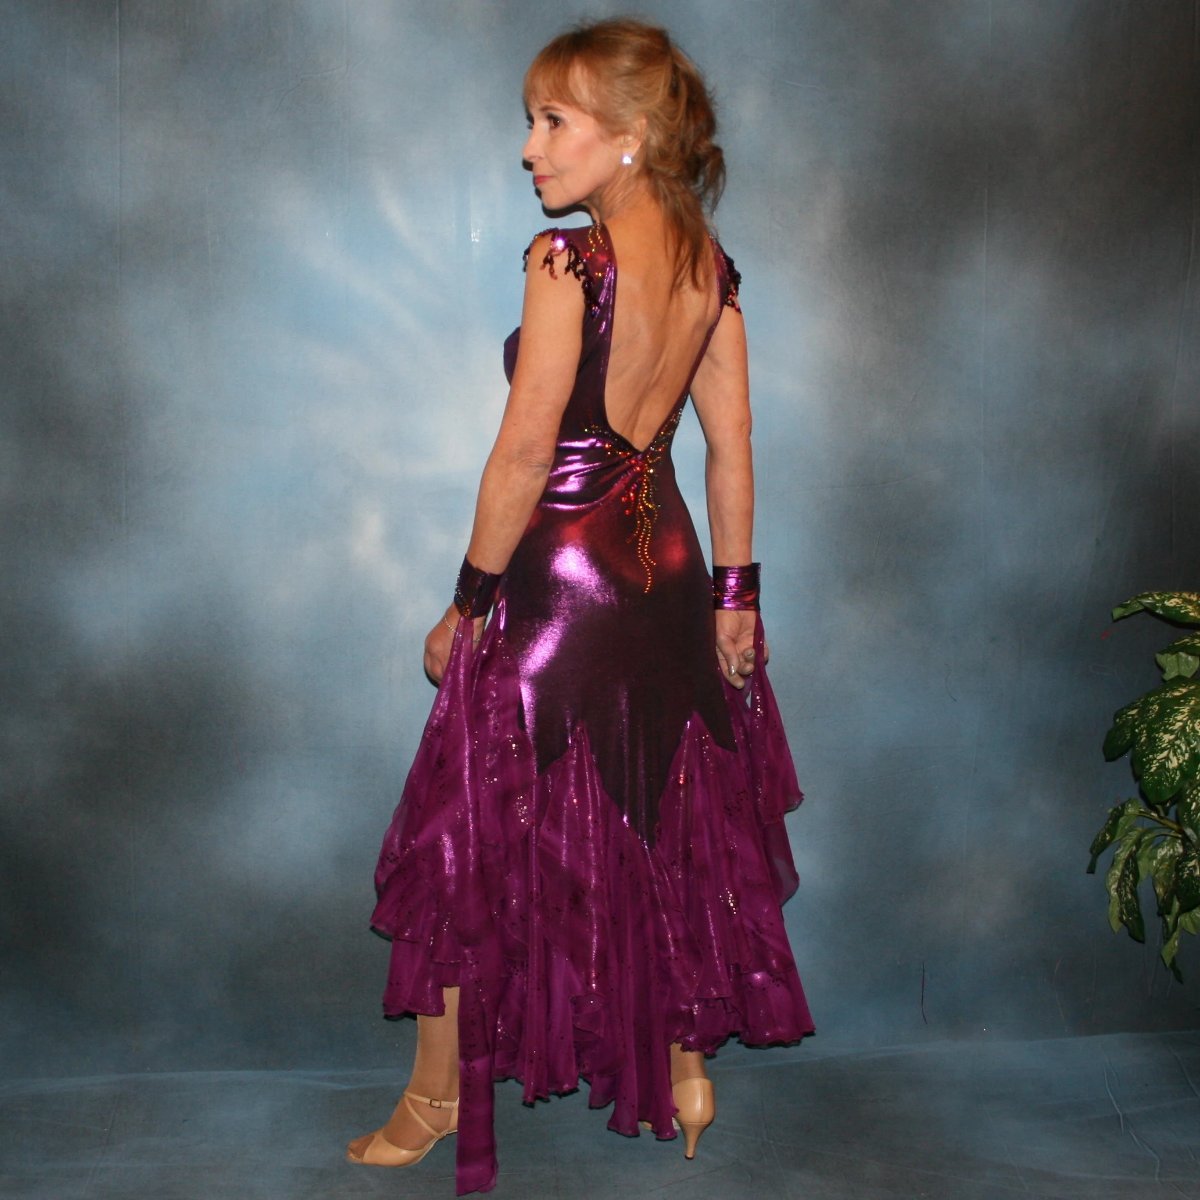 Crystal's Creations side view of Purple ballroom dress was created in rich luxurious deep plum metallic slinky with yards & yards of champagne sequined, iridescent chiffon flounces & floats in shades of plum…dripping with crystal volcano Swarovski rhinestone work,